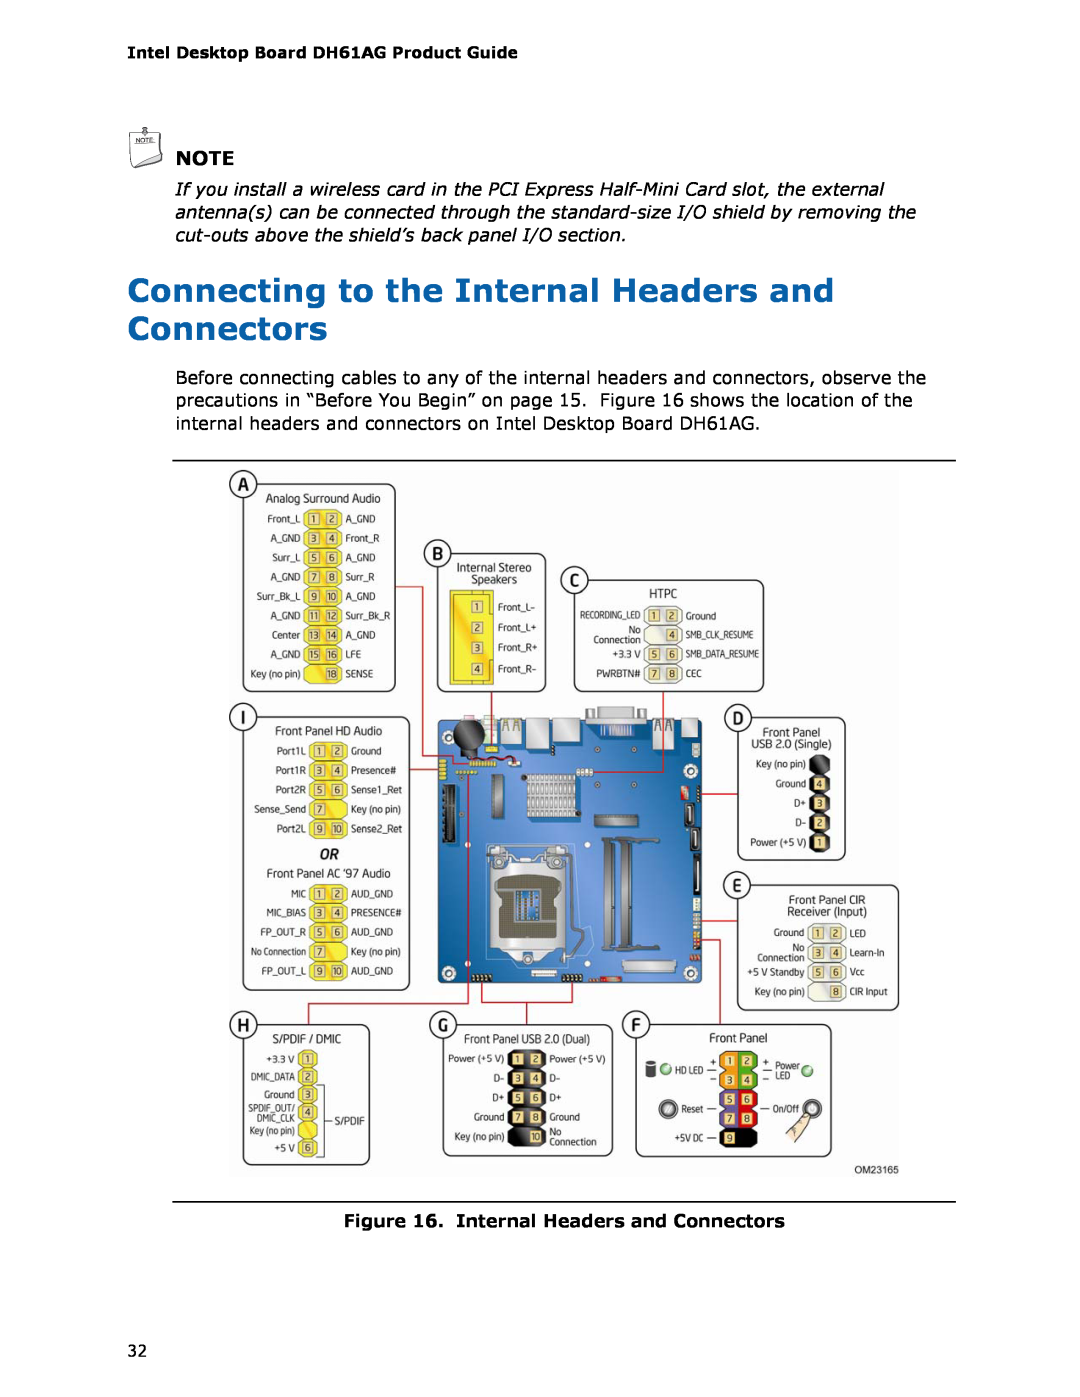 Intel BOXDH61AG manual Connecting to the Internal Headers and Connectors 